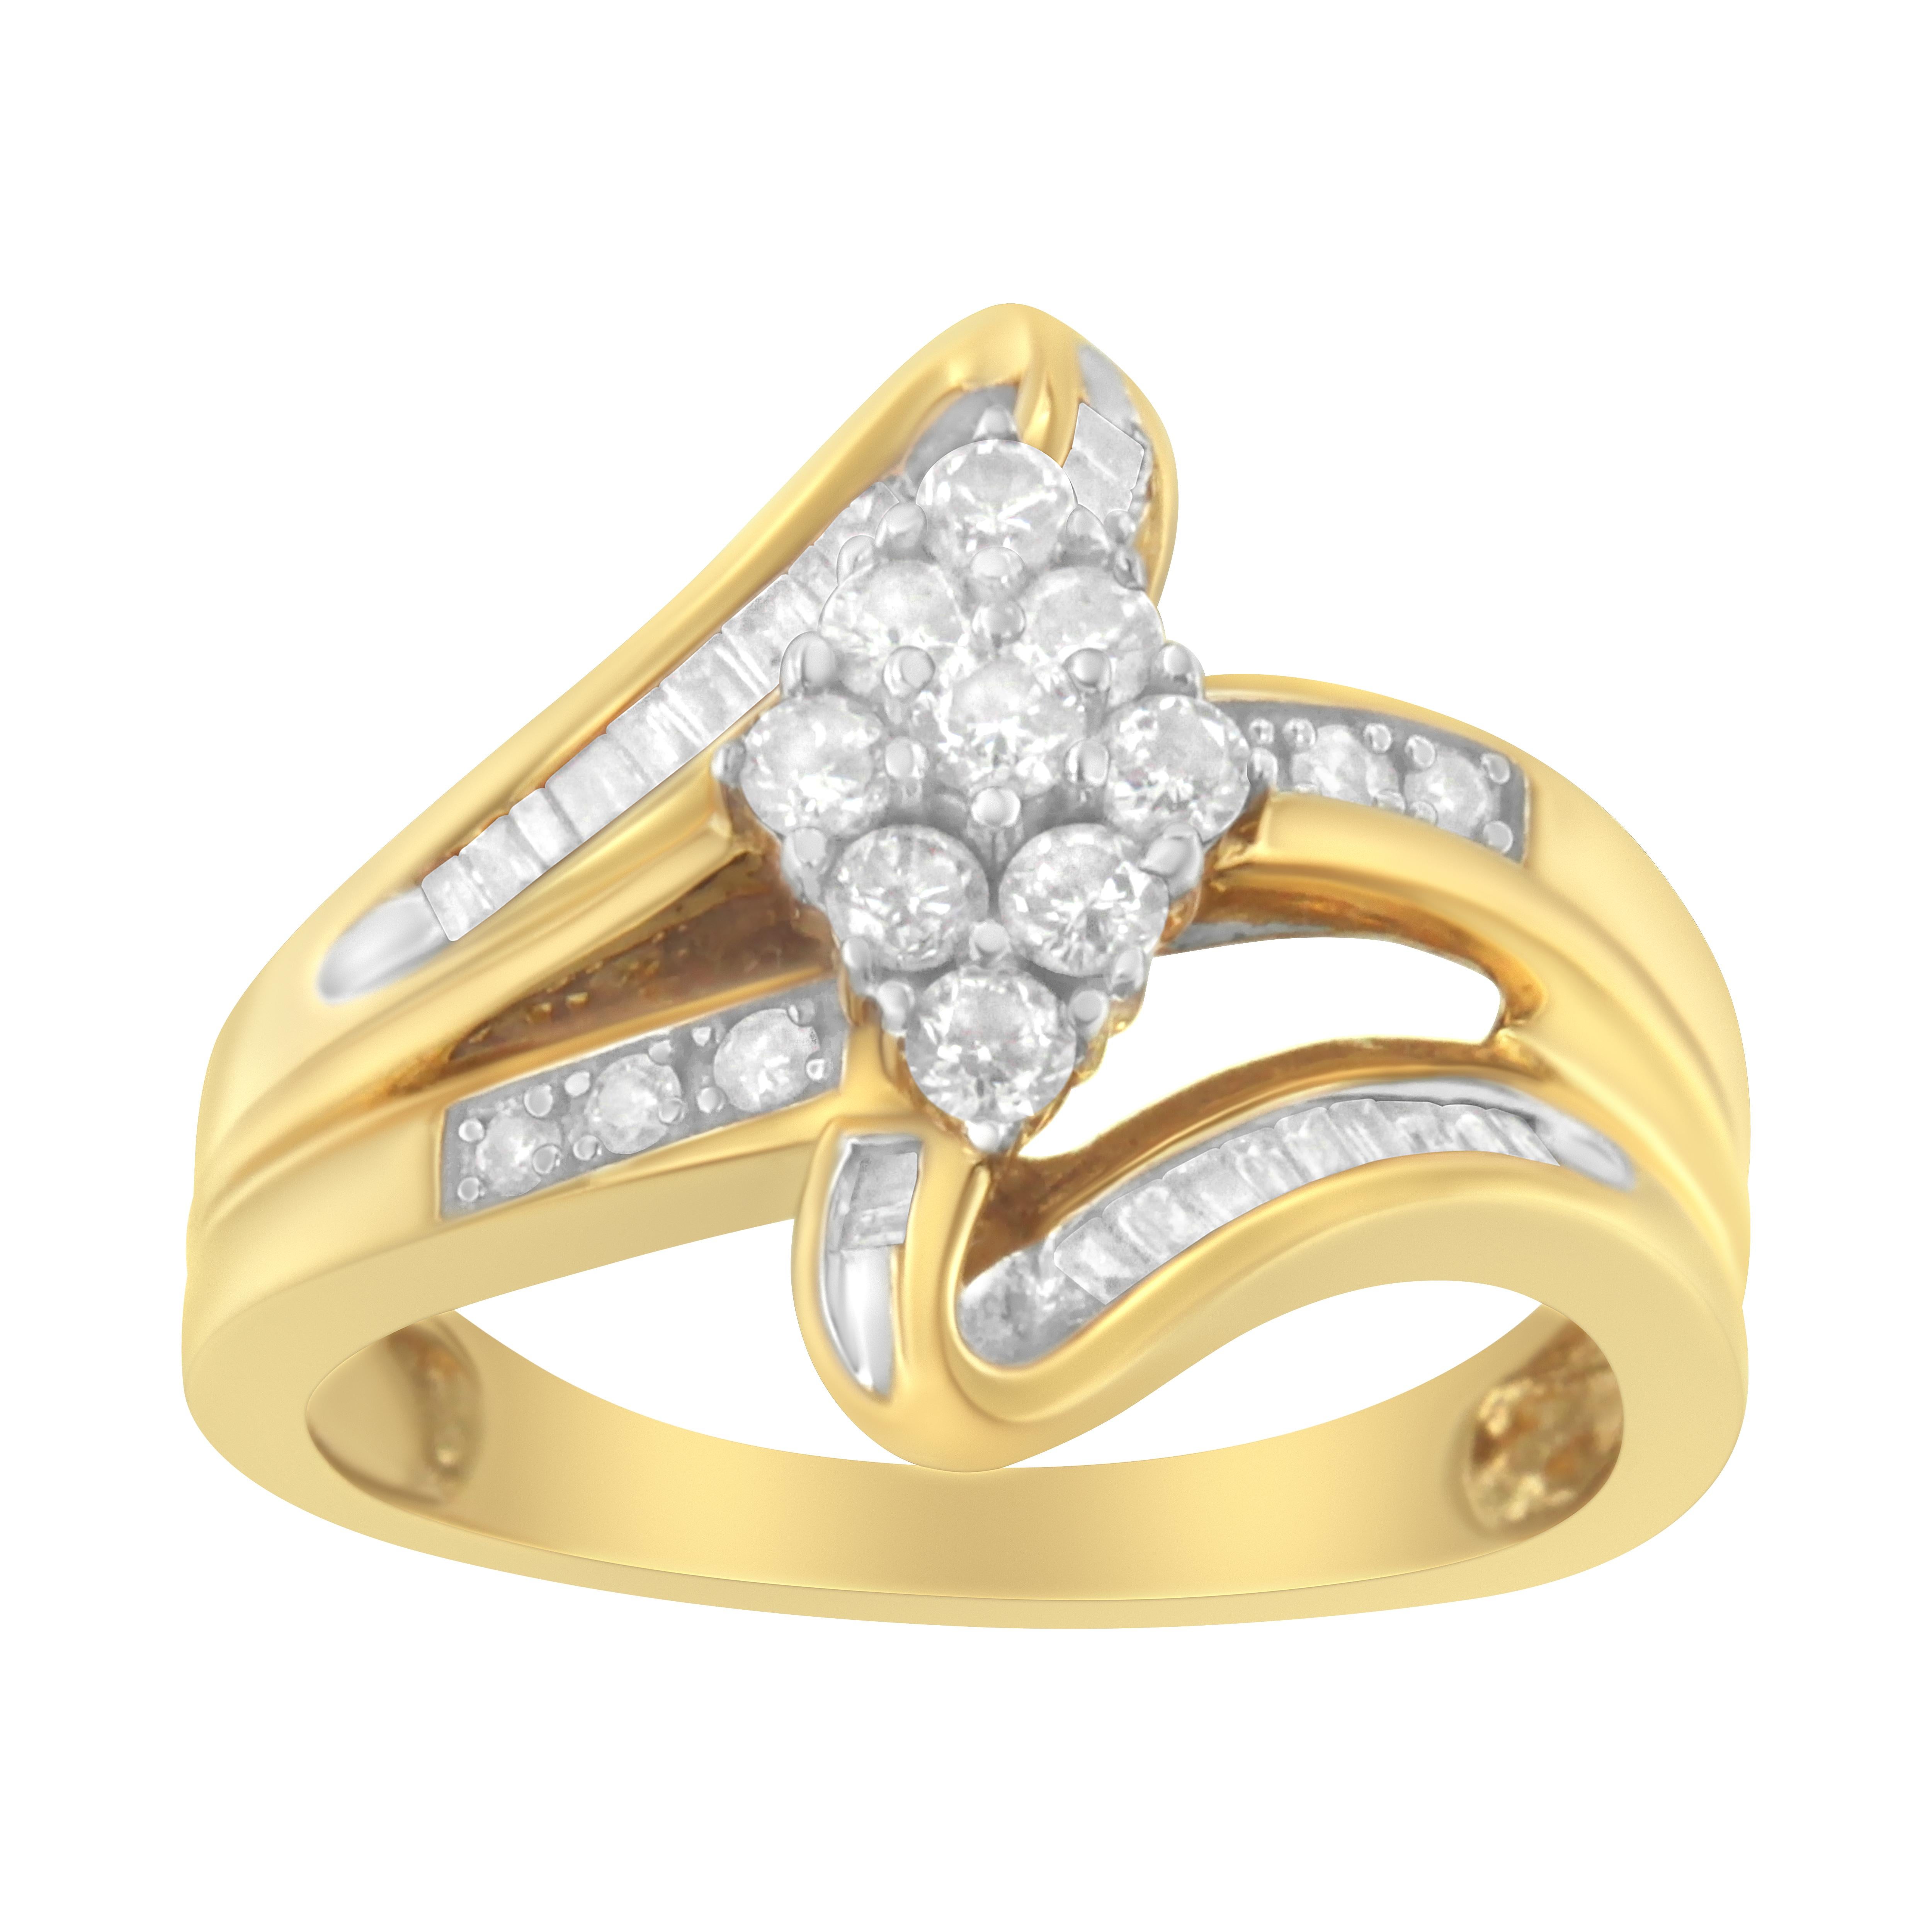 Bold and unique, this 10k yellow gold cluster ring will be your go-to statement piece. The band creates a ribbon-like illusion in four directions that come together at the center to showcase 9 round-cut diamonds prong-set in a rhombus-like design.